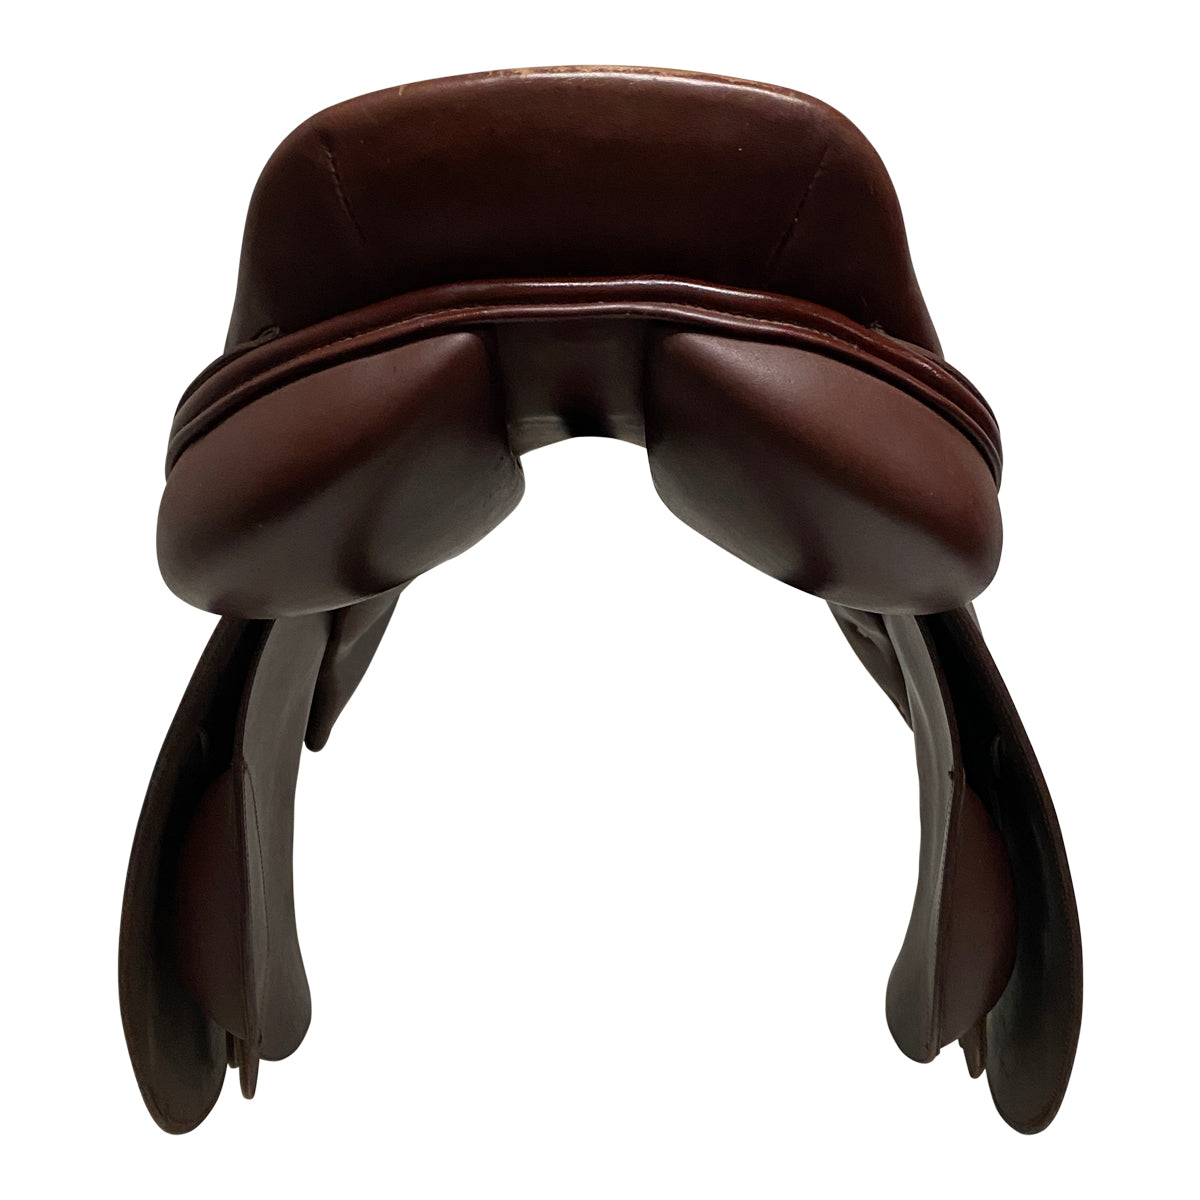 Dover 'Full Contact Deluxe' Circuit Saddle in Chestnut